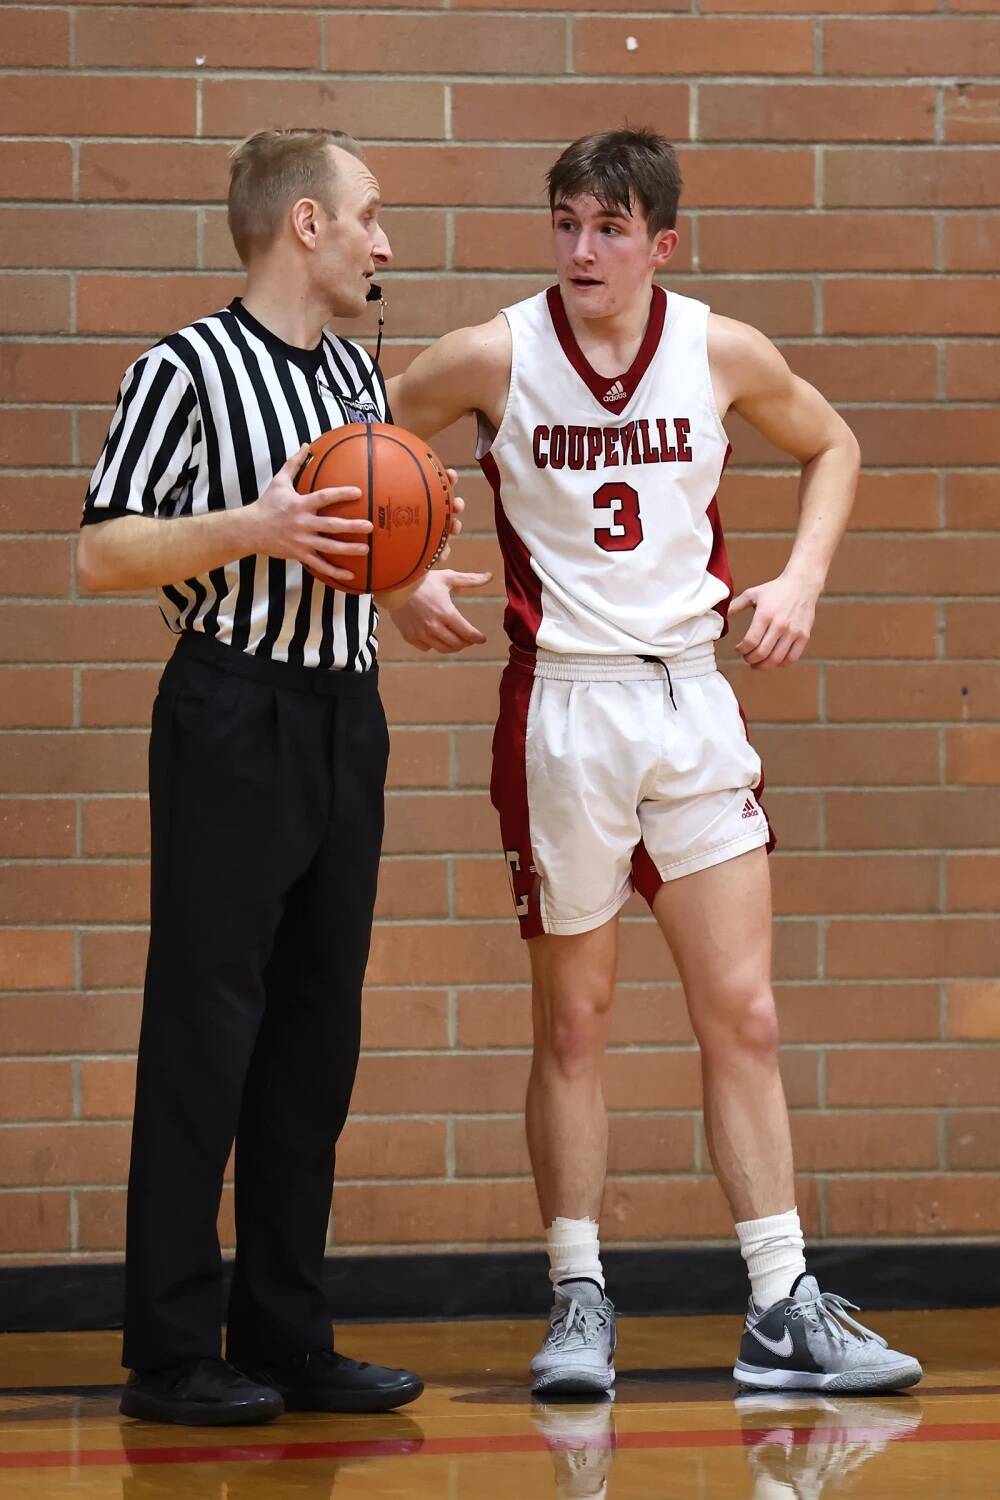 Photo by John Fisken
Logan Downes was picked as an All-State player by the Washington Interscholastic Basketball Coaches Association